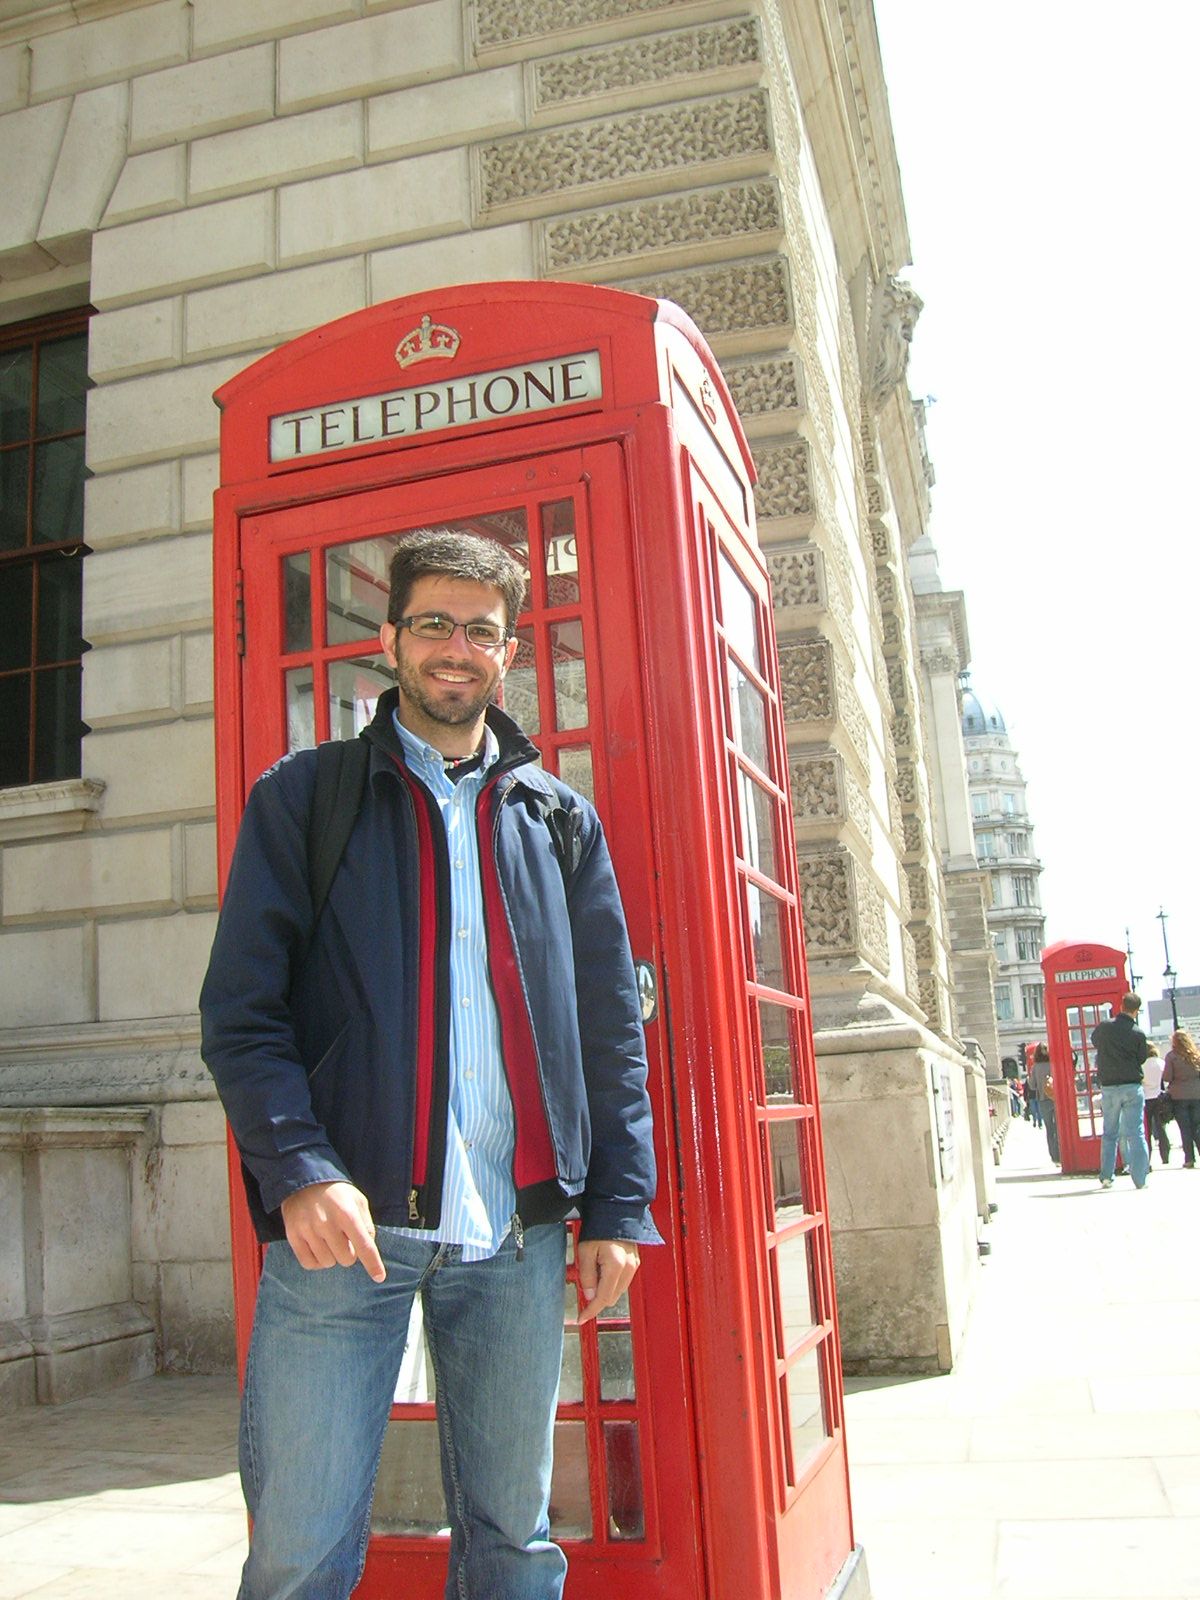 a man is standing next to the phone booth